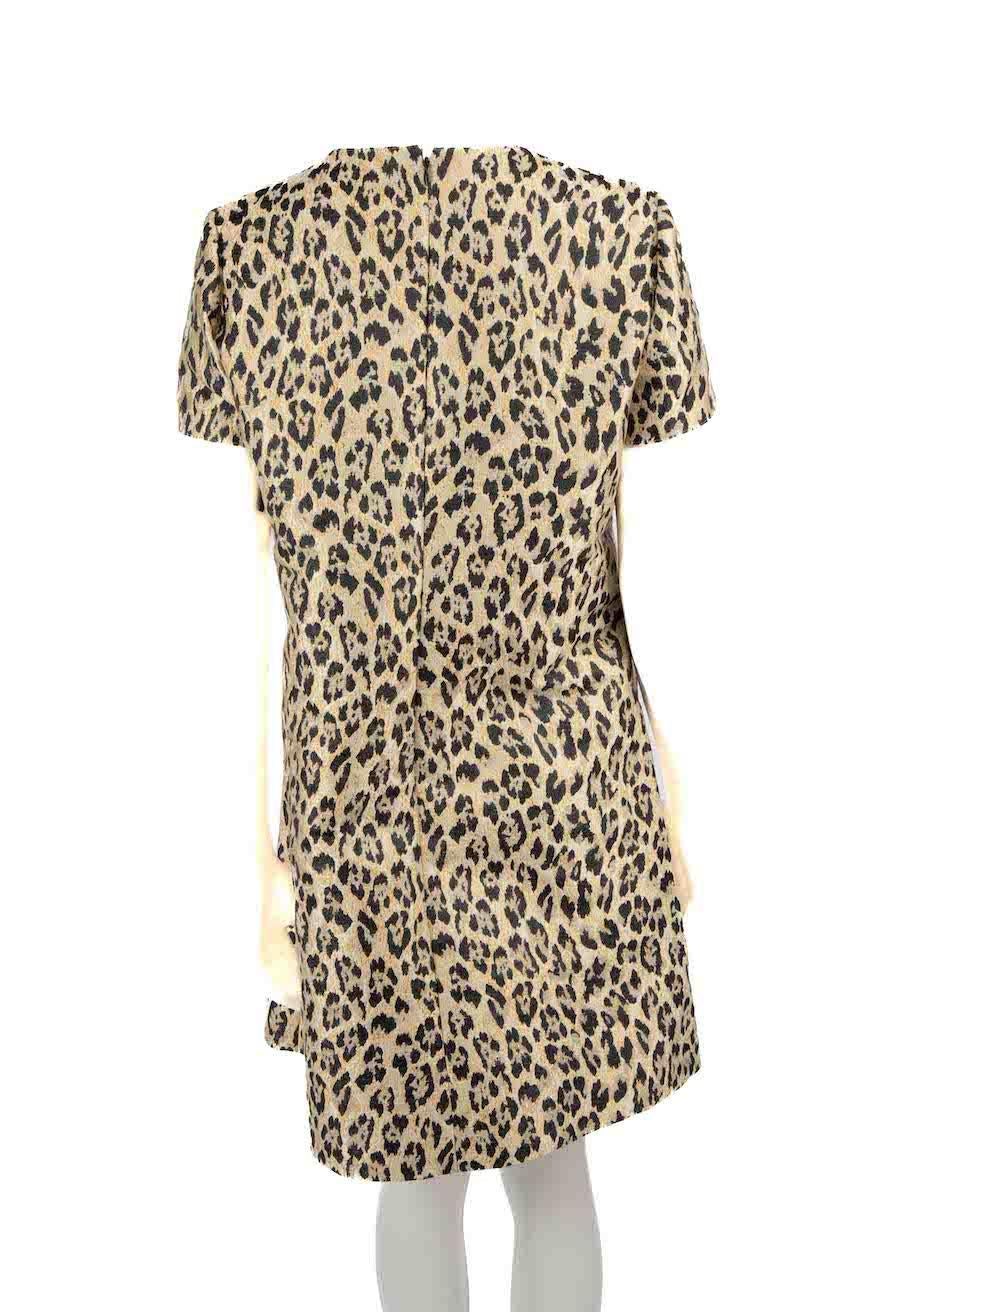 Valentino Beige Leopard Jacquard Metallic Dress Size XL In Good Condition For Sale In London, GB